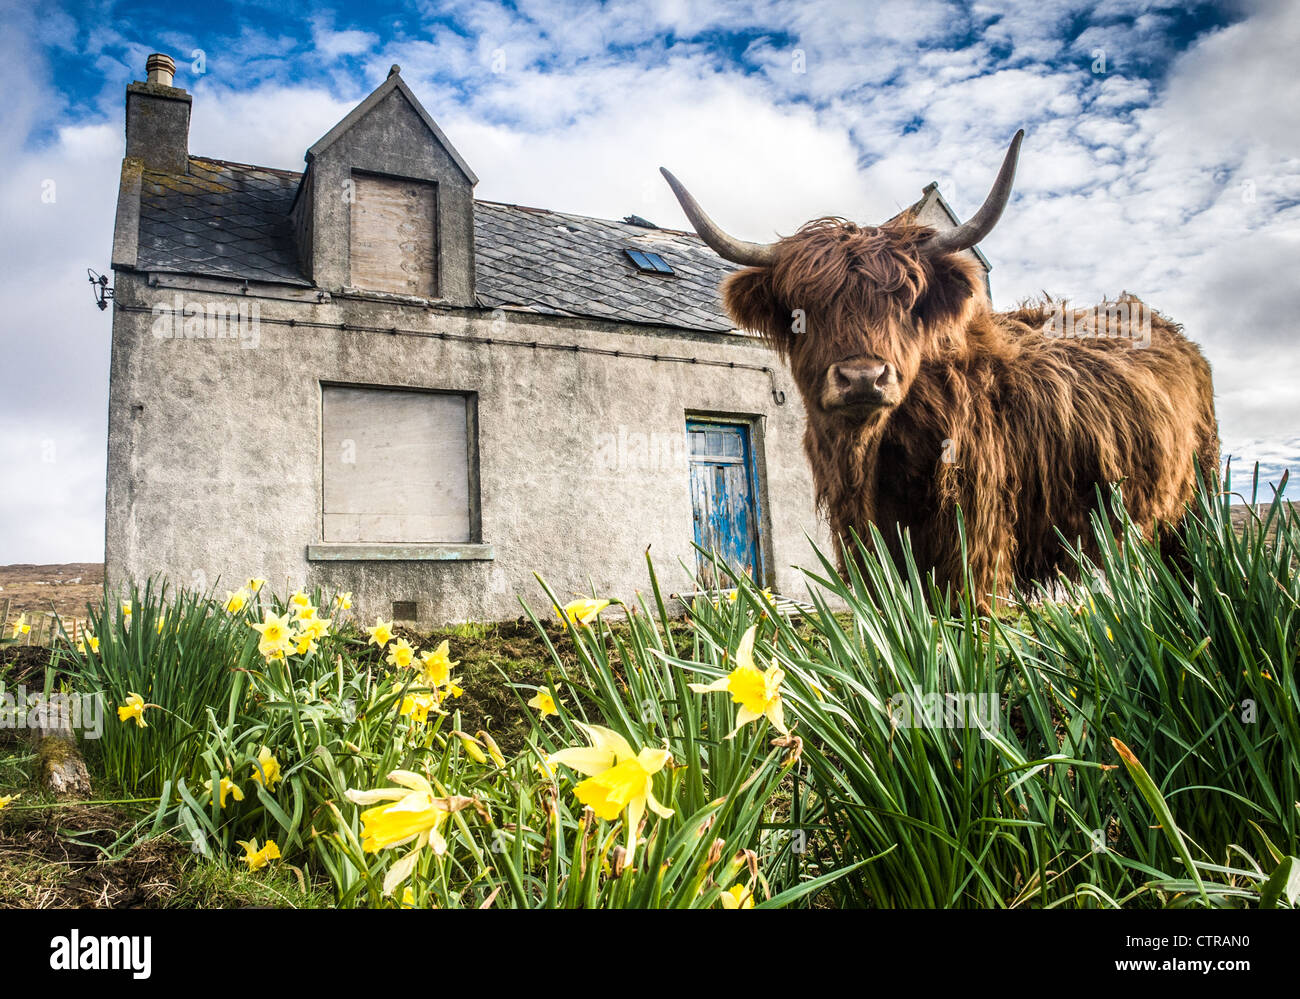 Vache Highland, Isle of Harris, Scotland Banque D'Images